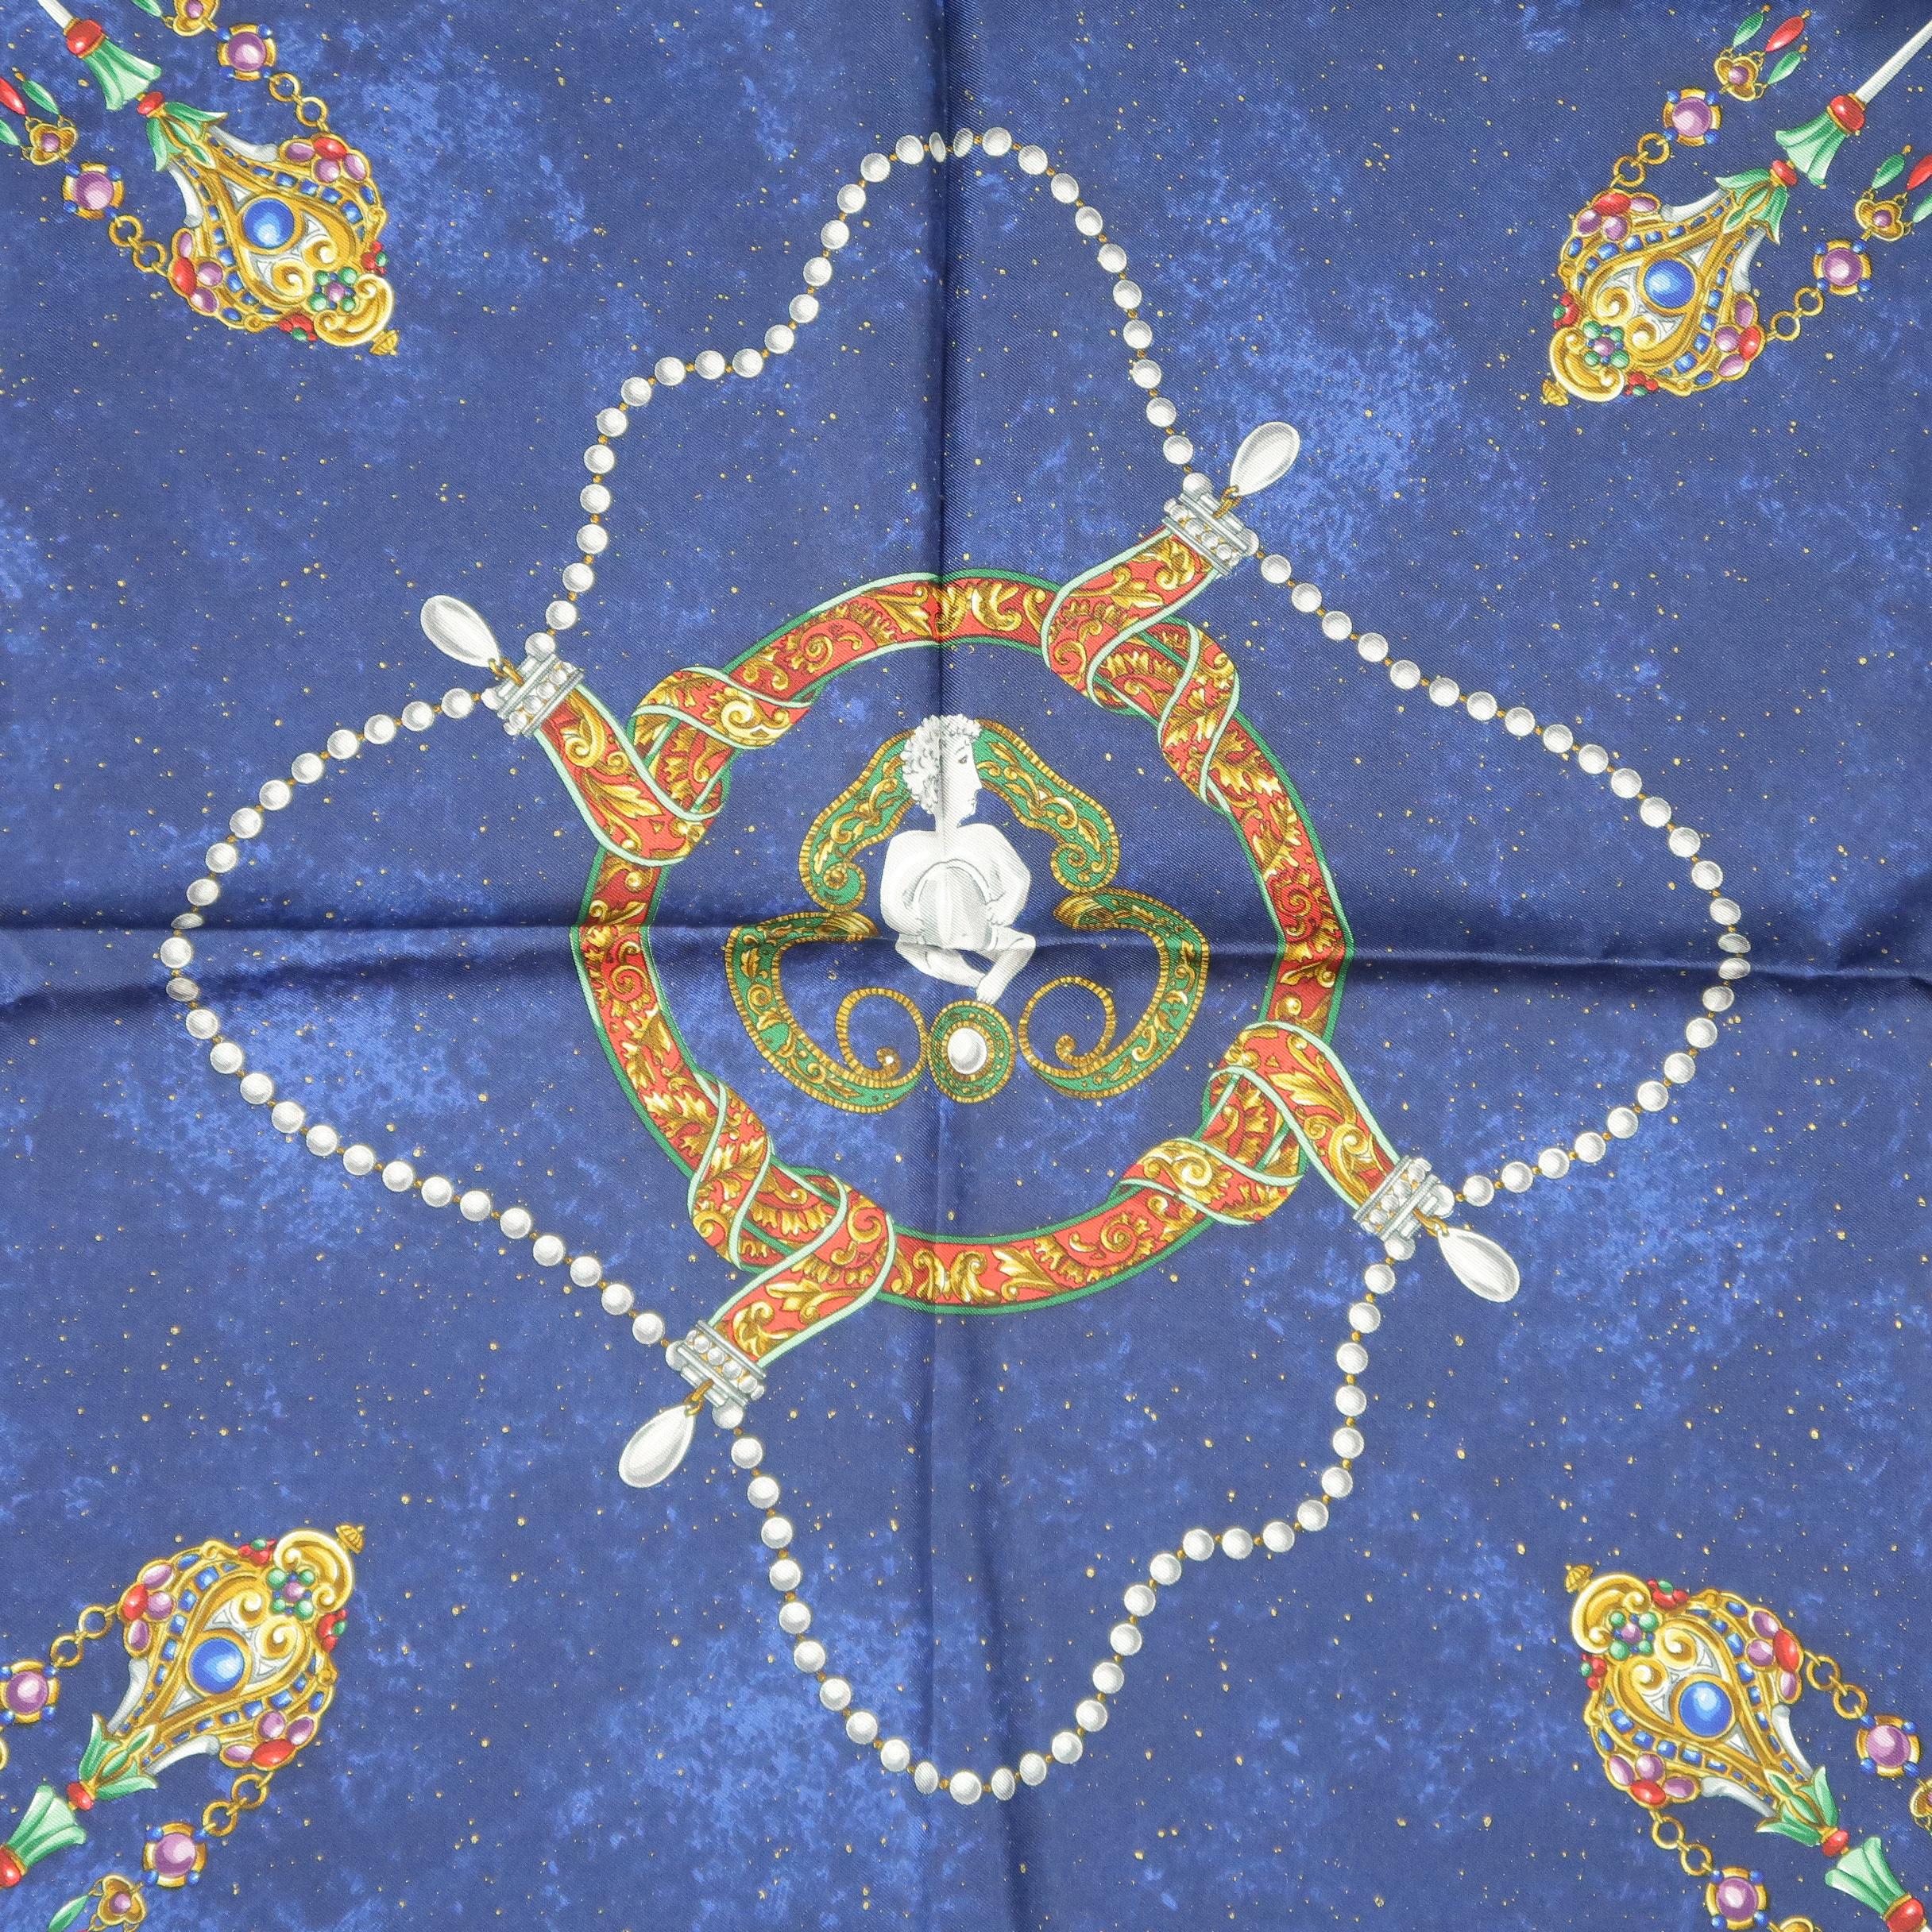 Vintage BOTTEGA VENETA scarf comes in a navy blue night sky print silk scarf with an all over abstract print featuring pearl and jeweled crowns and jewelry with angel motifs. Original I.Magnin tag attached. Made in Italy.
 
New with Tags.
 
88 x 88